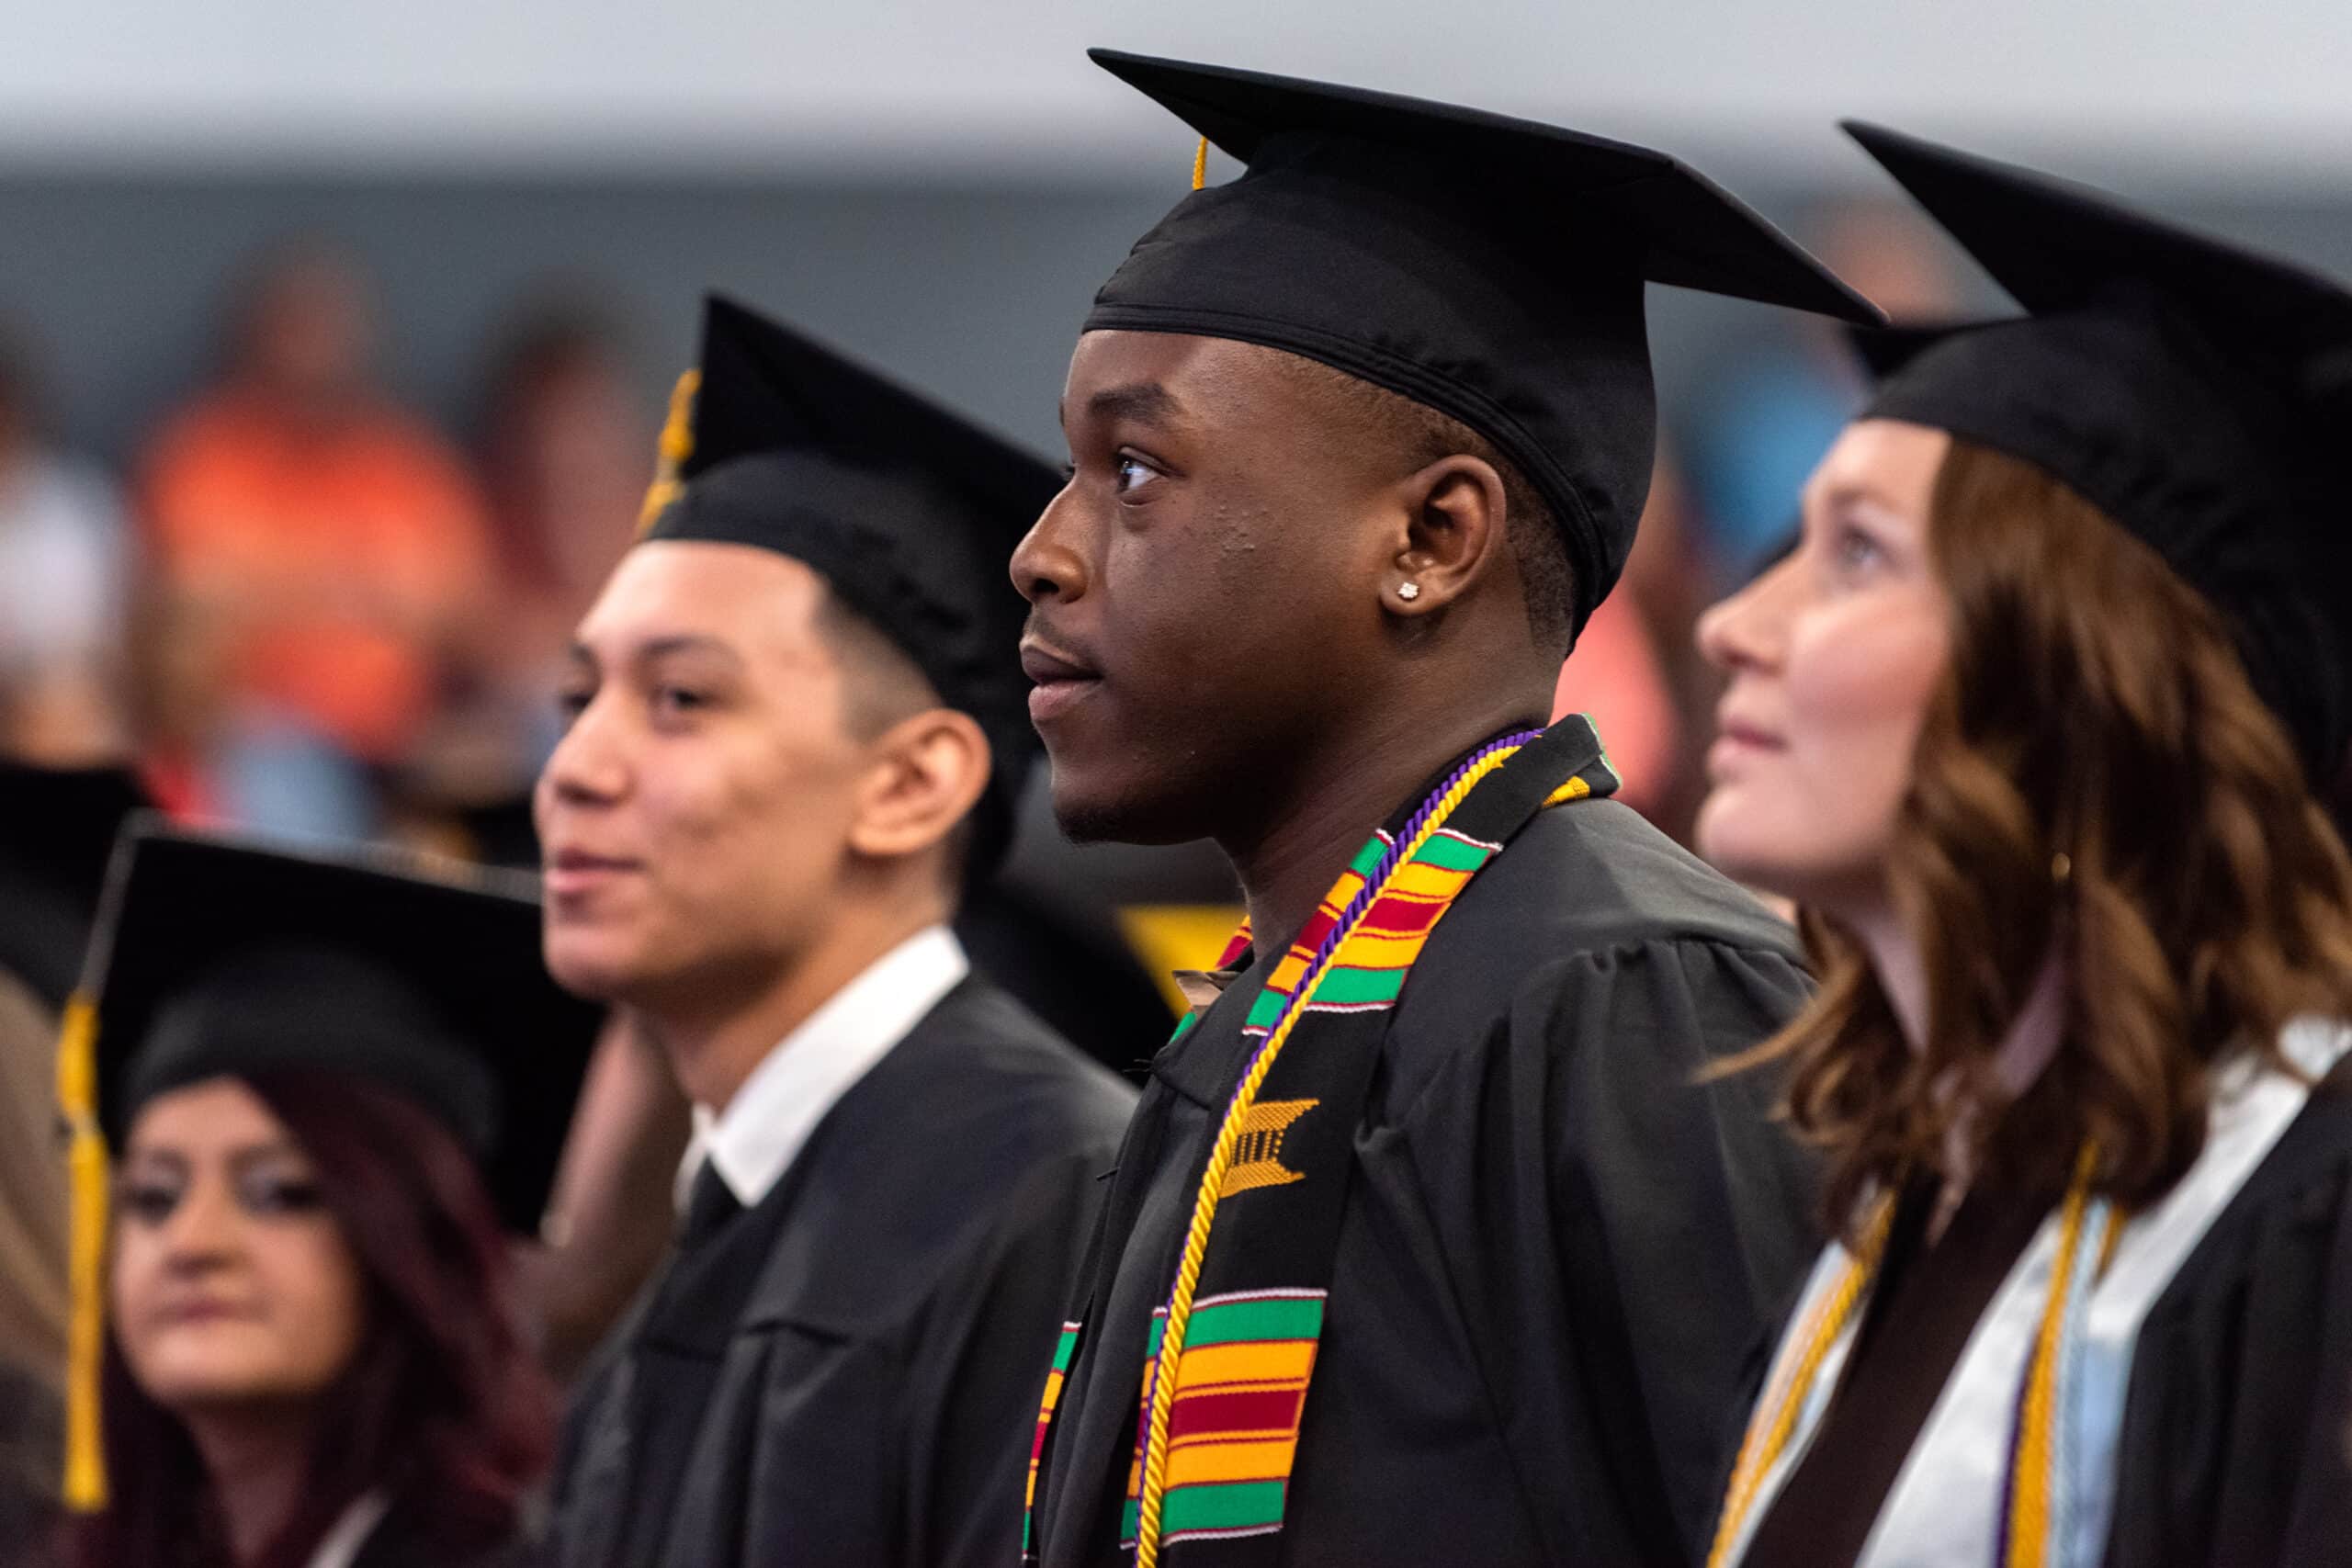 Students look on during undergraduate commencement ceremony